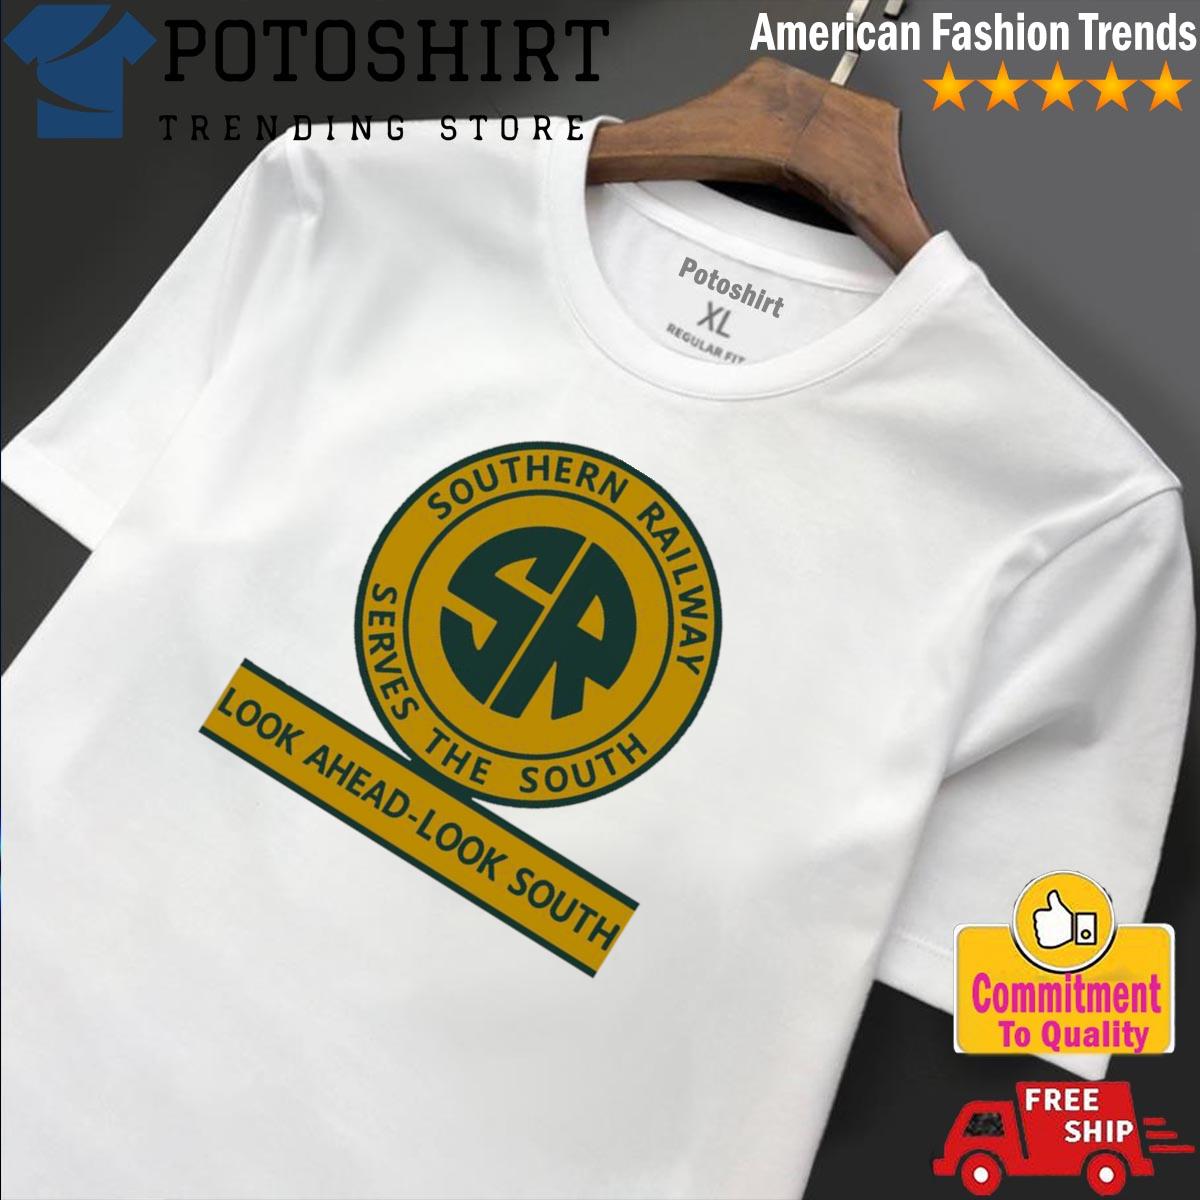 Official southern Railway Serves The South Look Ahead Look South Logo shirt